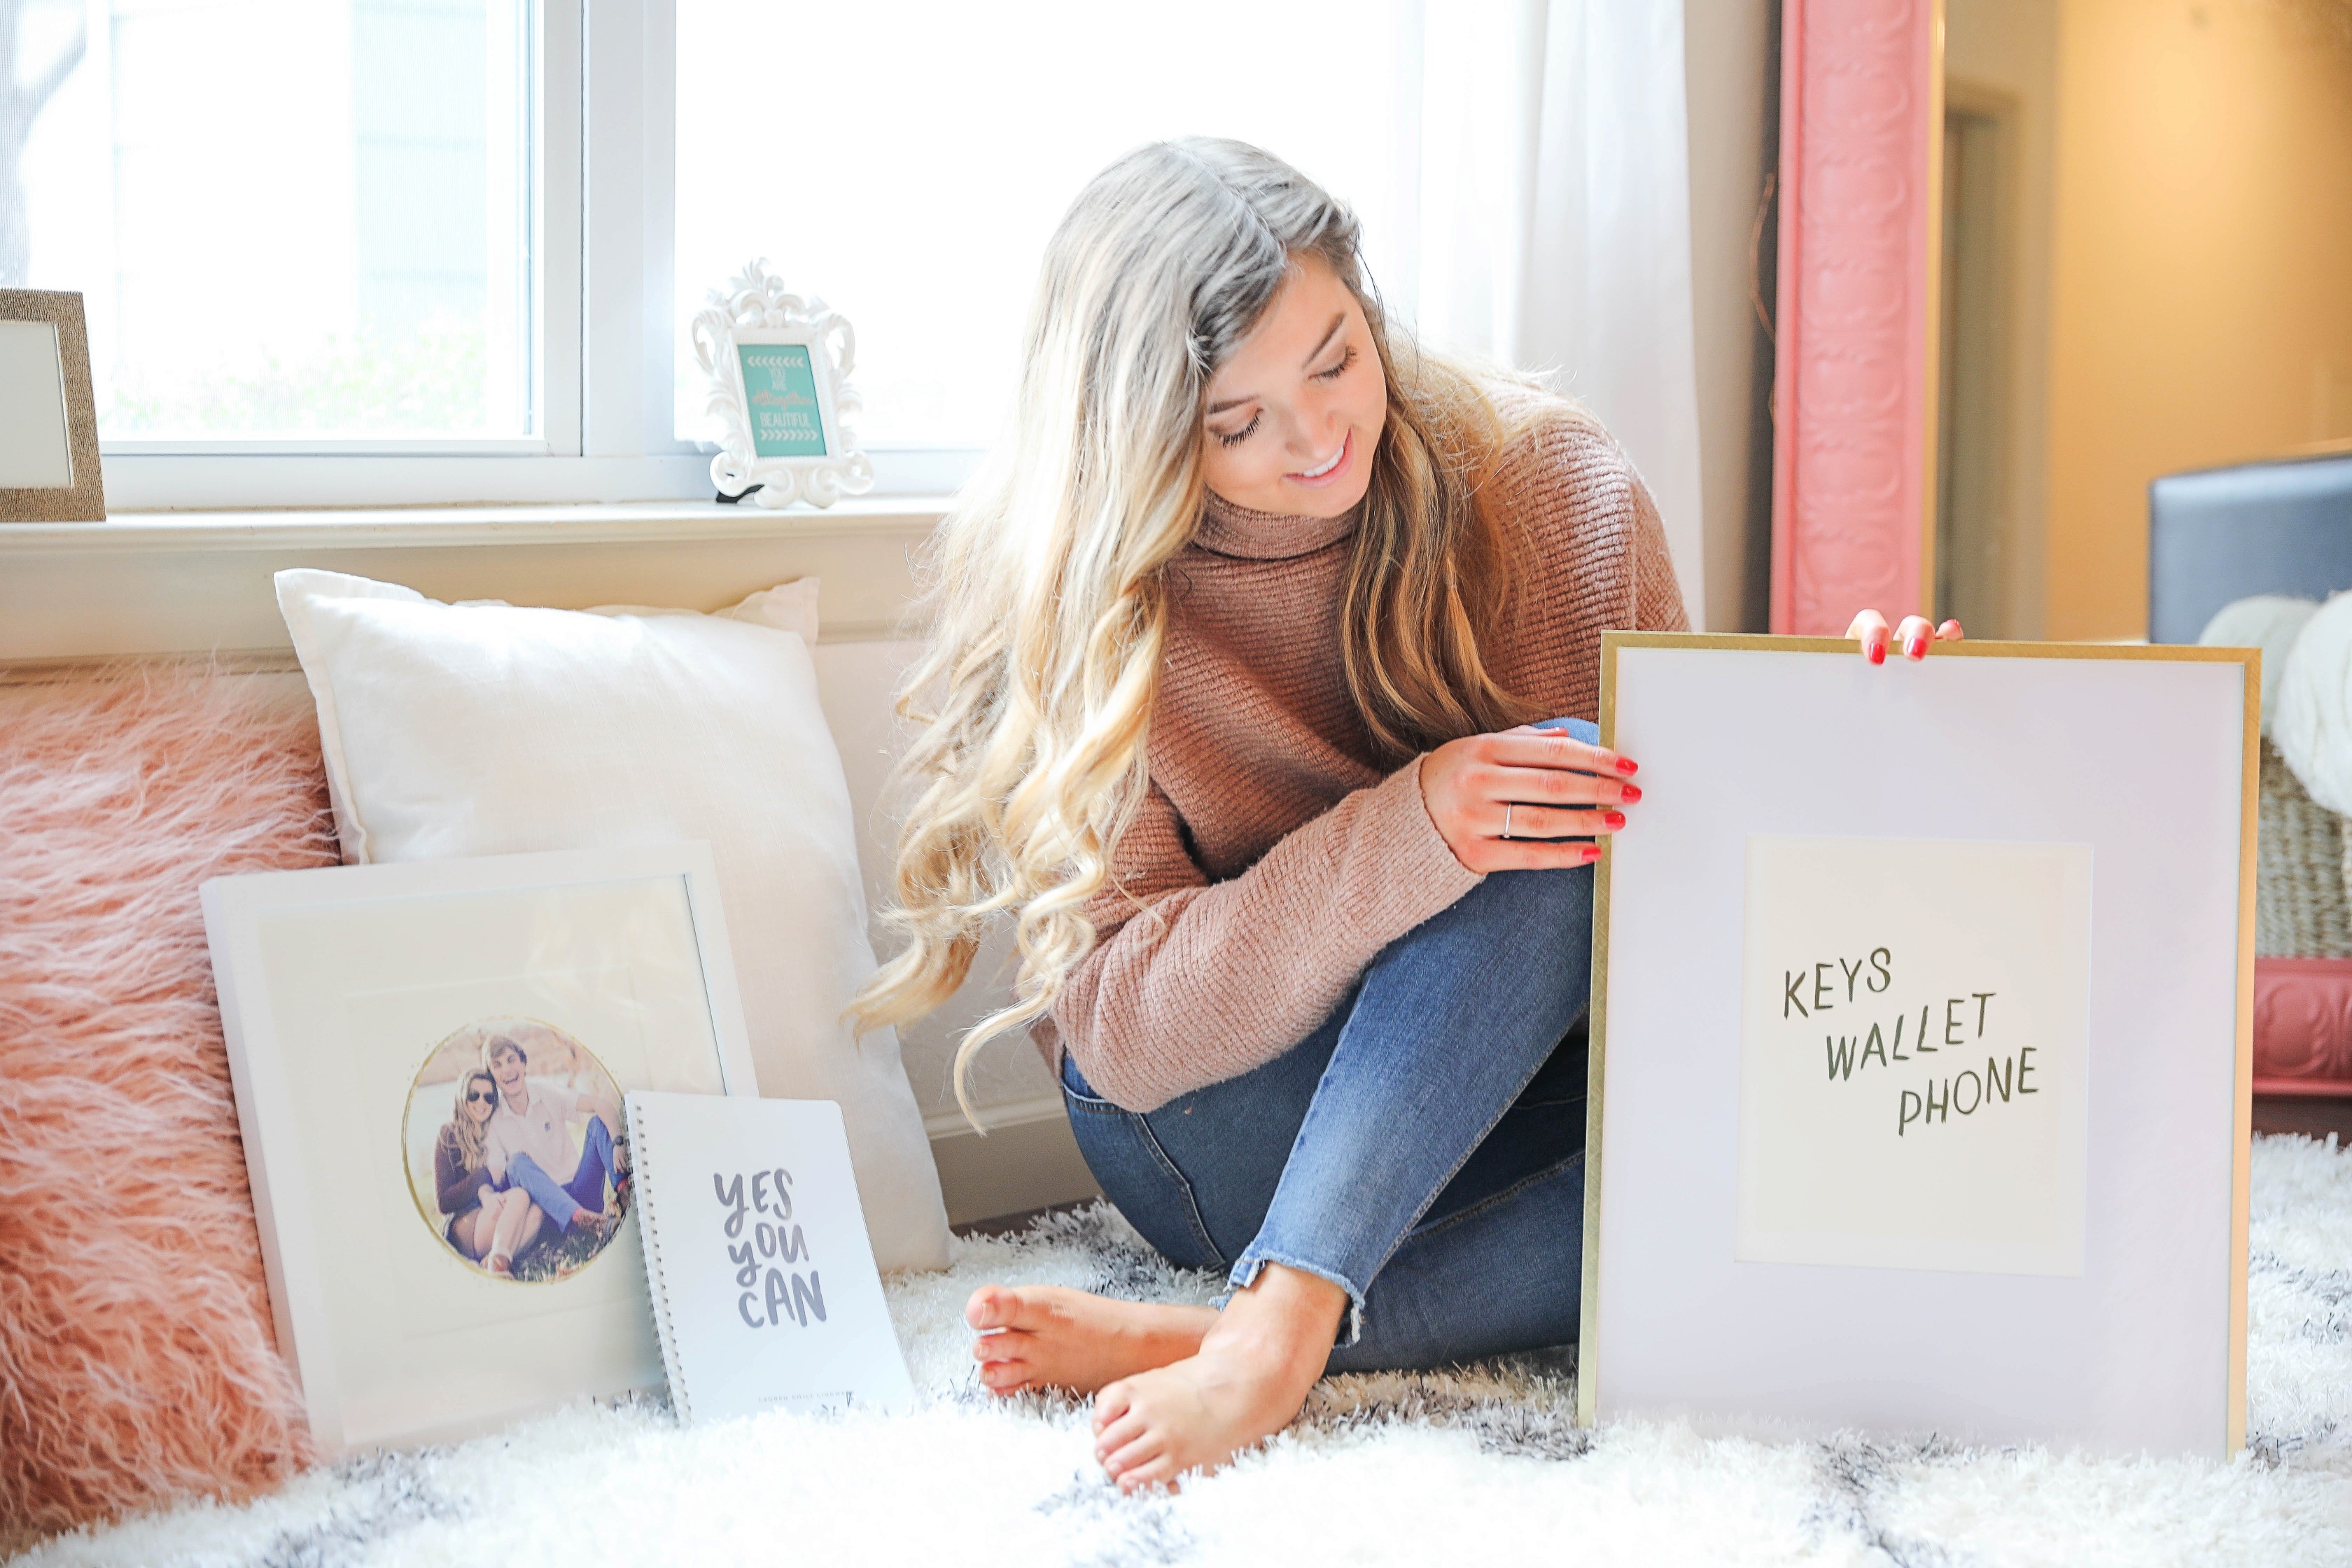 Graduation Gift Ideas with Minted.com Minted has so many cute gifts especially for graduation season! Check them out on the fashion blog daily dose of charm by Lauren Lindmark